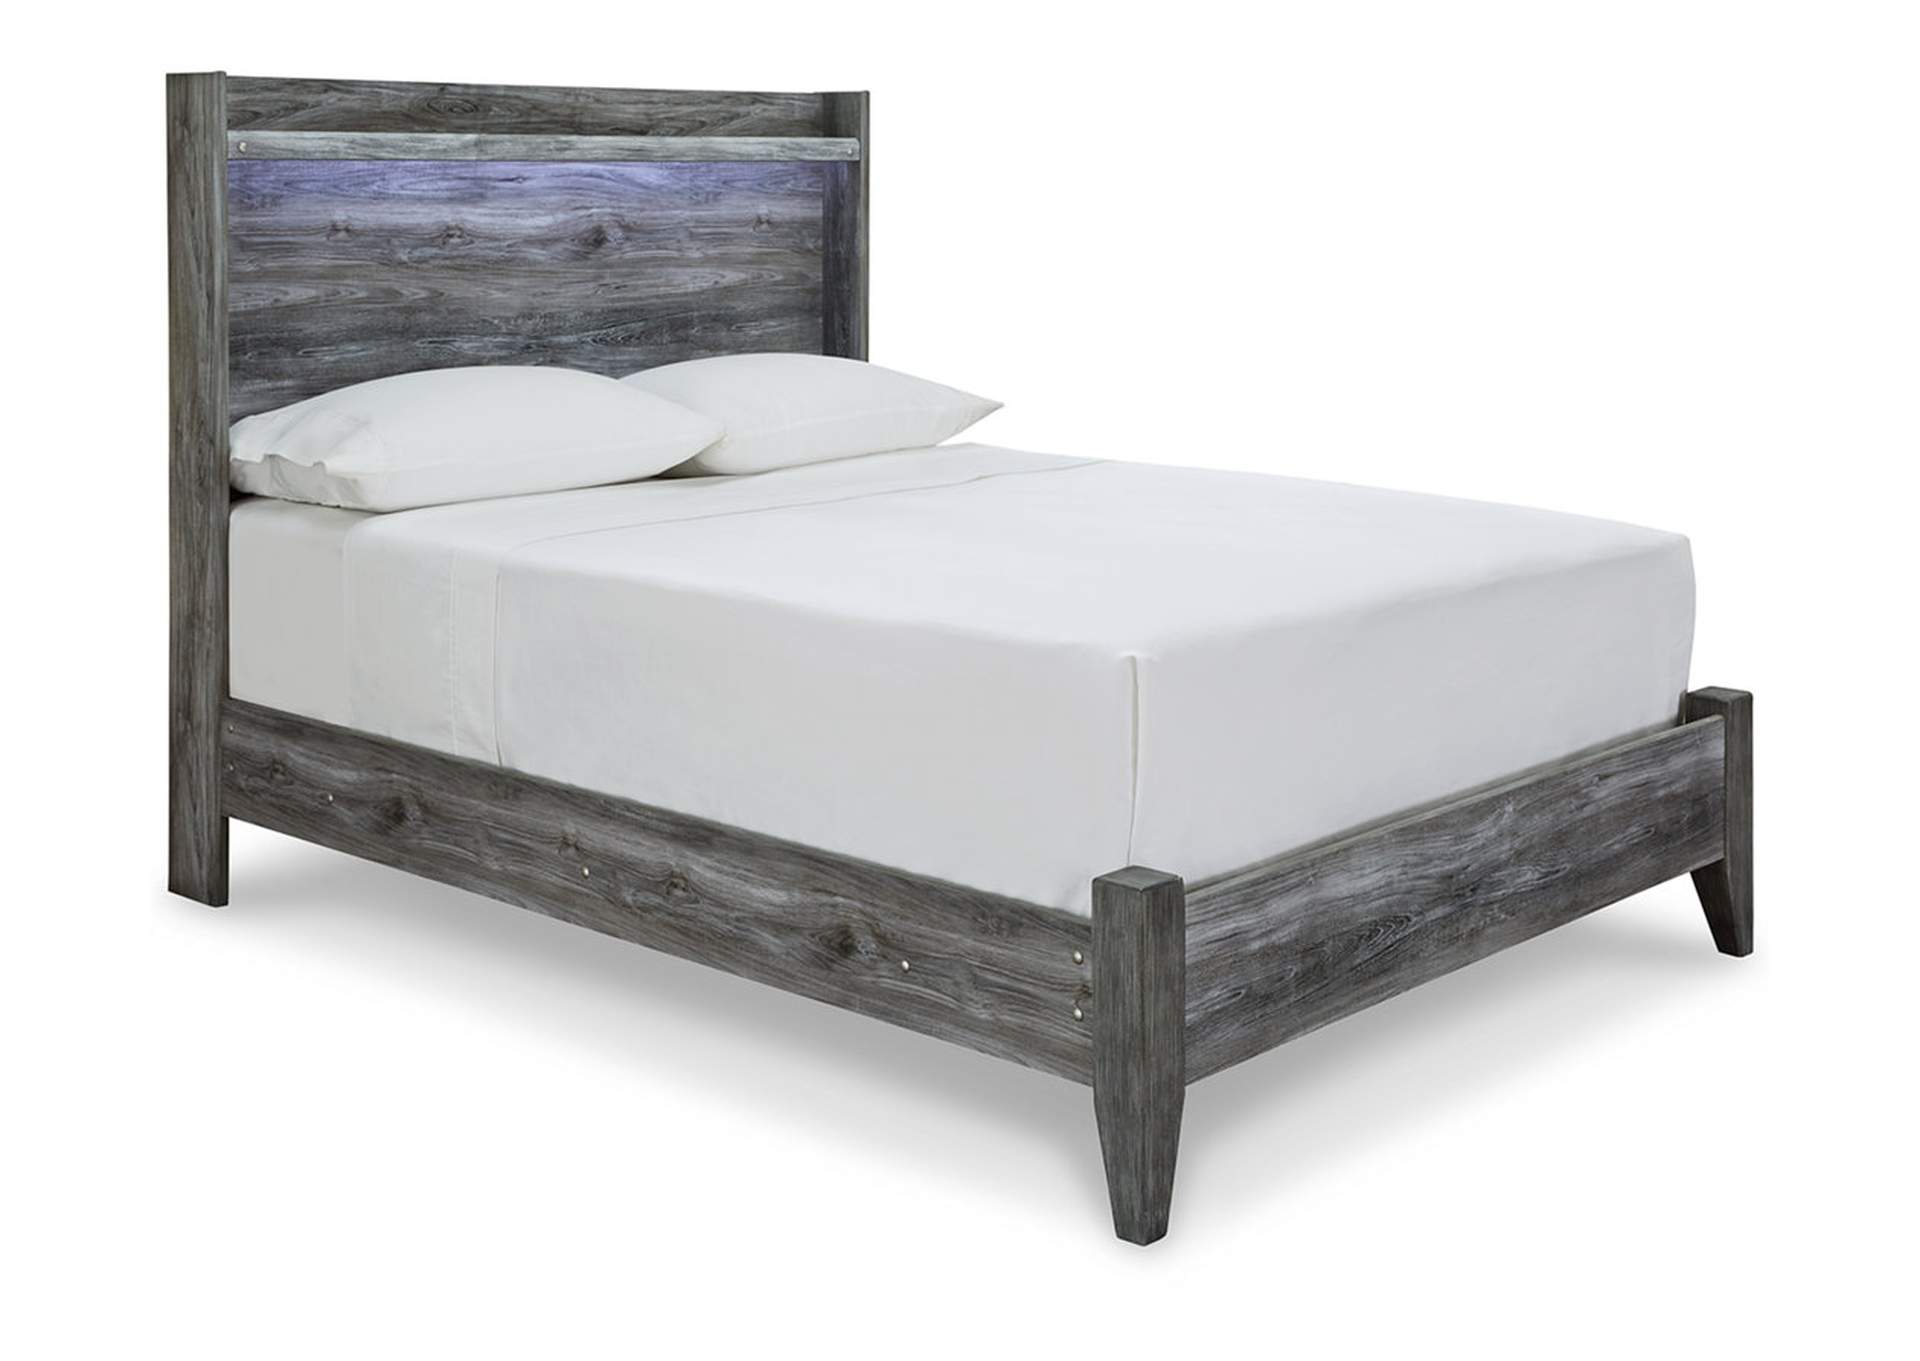 Baystorm Full Panel Bed,Signature Design By Ashley